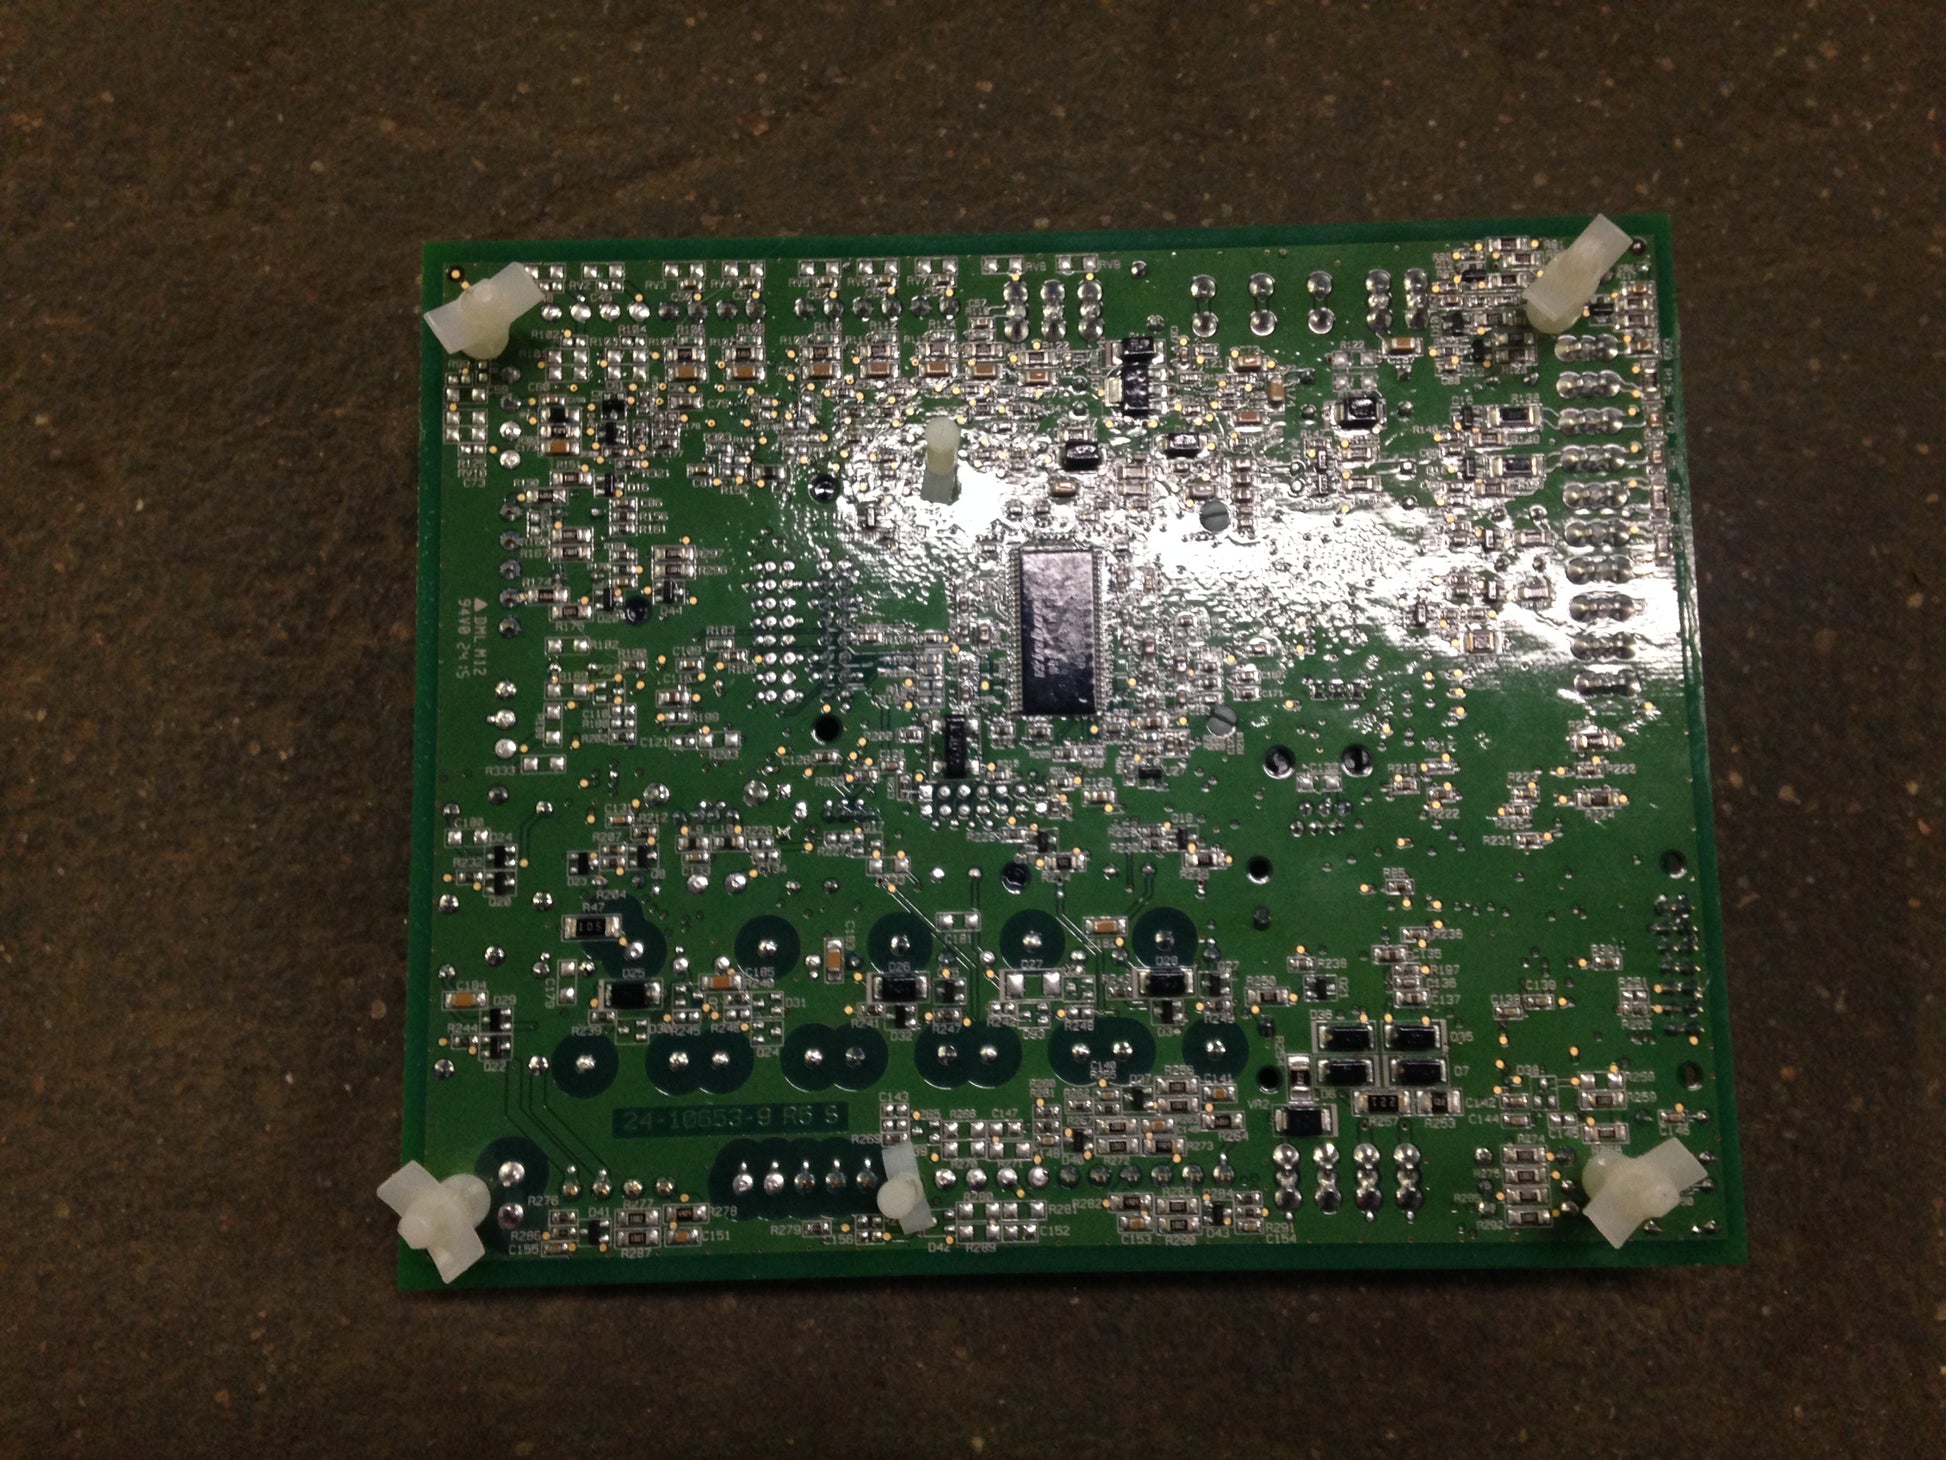 1 STAGE CIRCUIT BOARD, SEE, W/COMM UCB1, 24 VAC